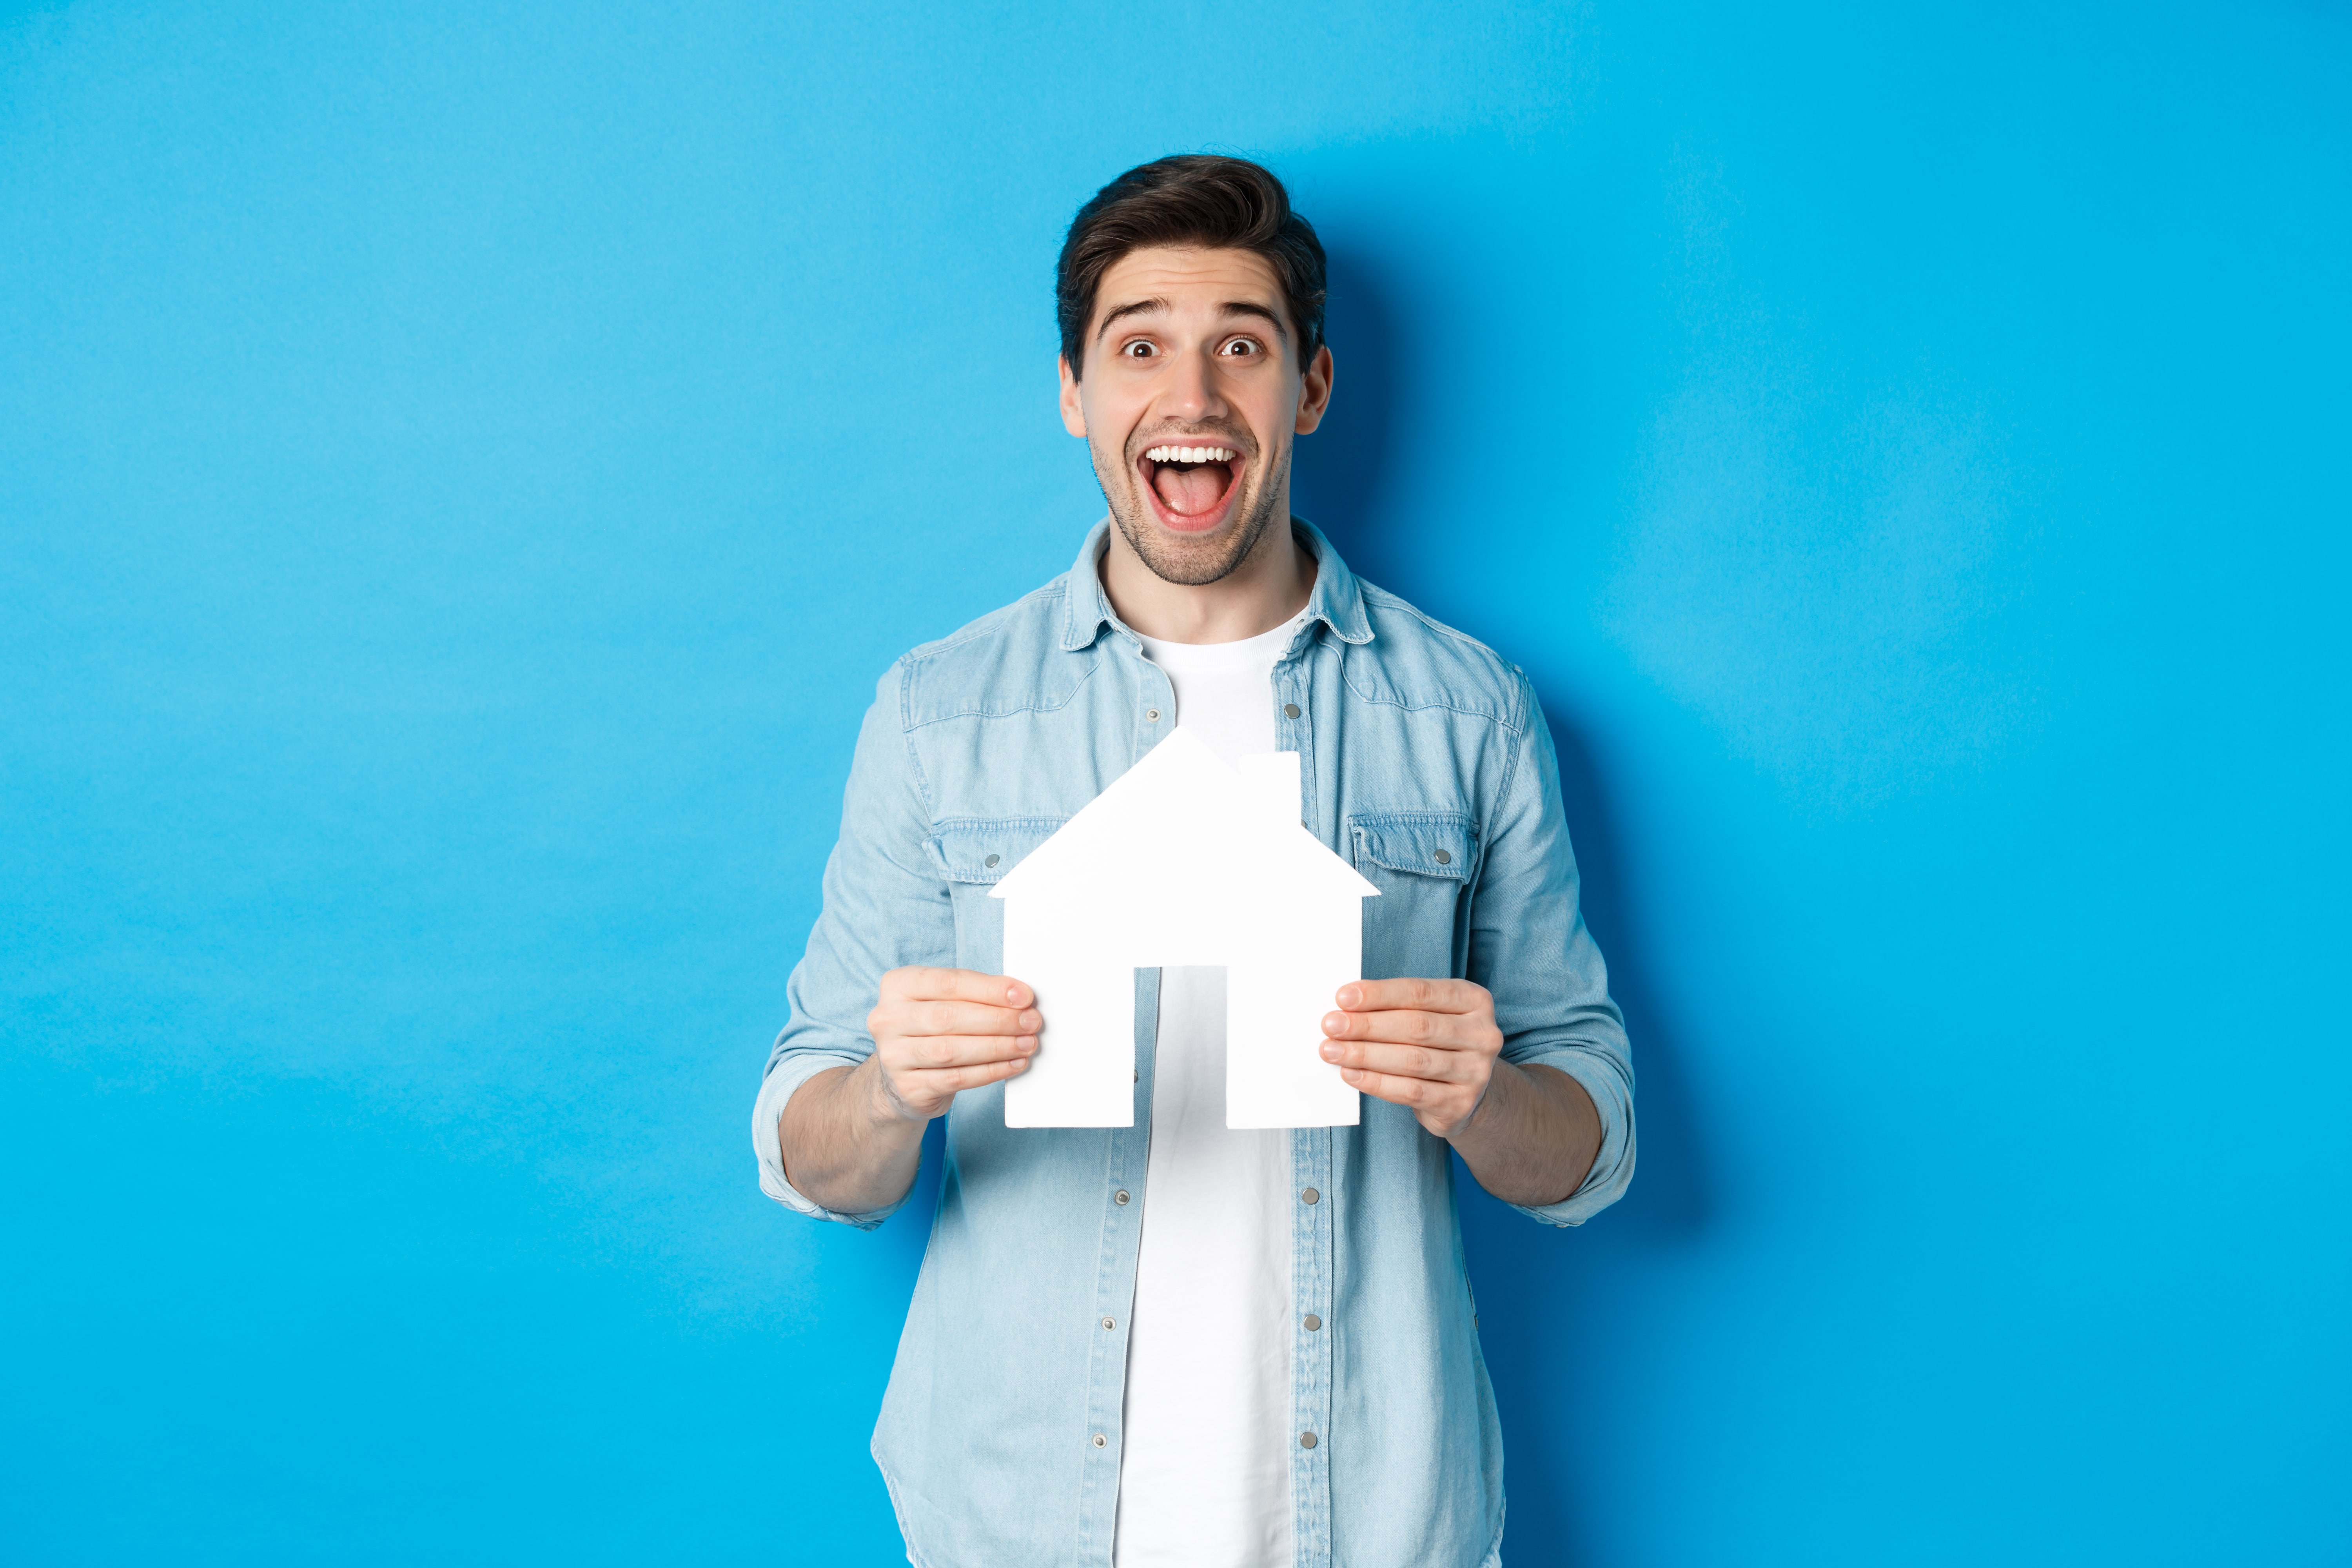 Insurance Mortgage Real Estate Concept Happy Man Holding House Model Smiling Excited Buying Property Renting Apartment Standing Against Blue Background Min